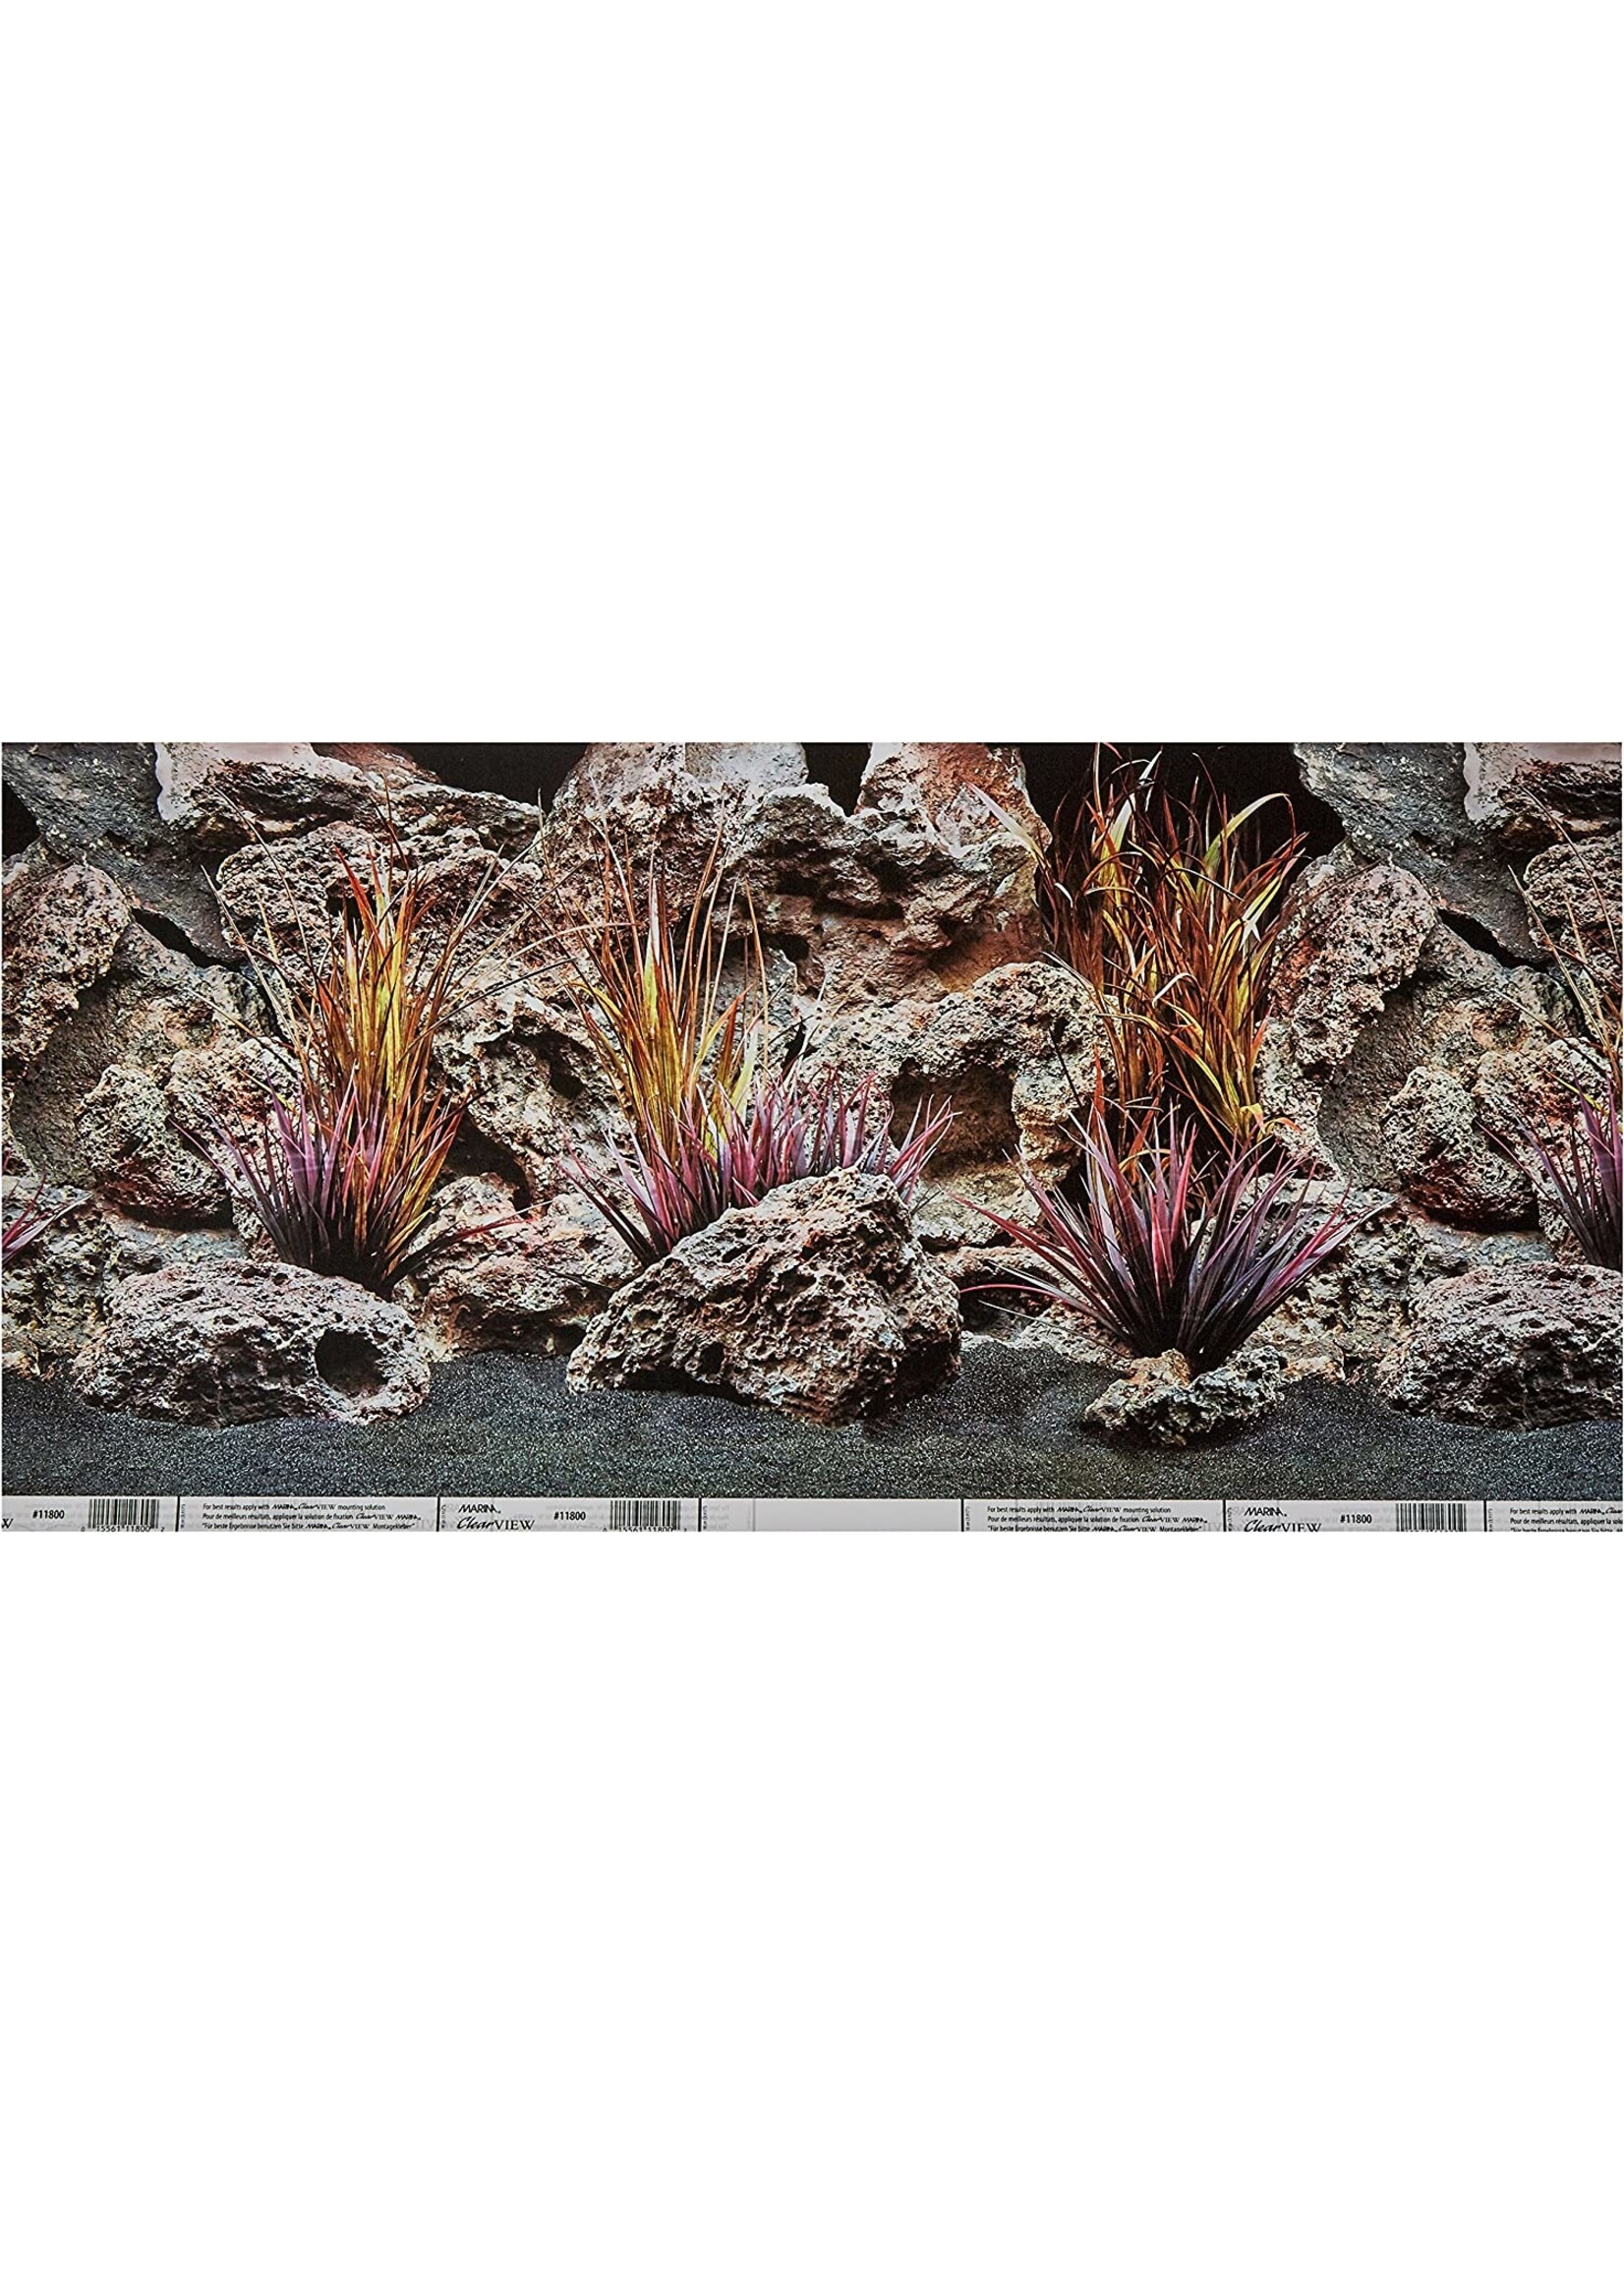 Marina Marina Double Sided Aquarium Background- Jungle Floral / Red Lace 12 in x 24 in